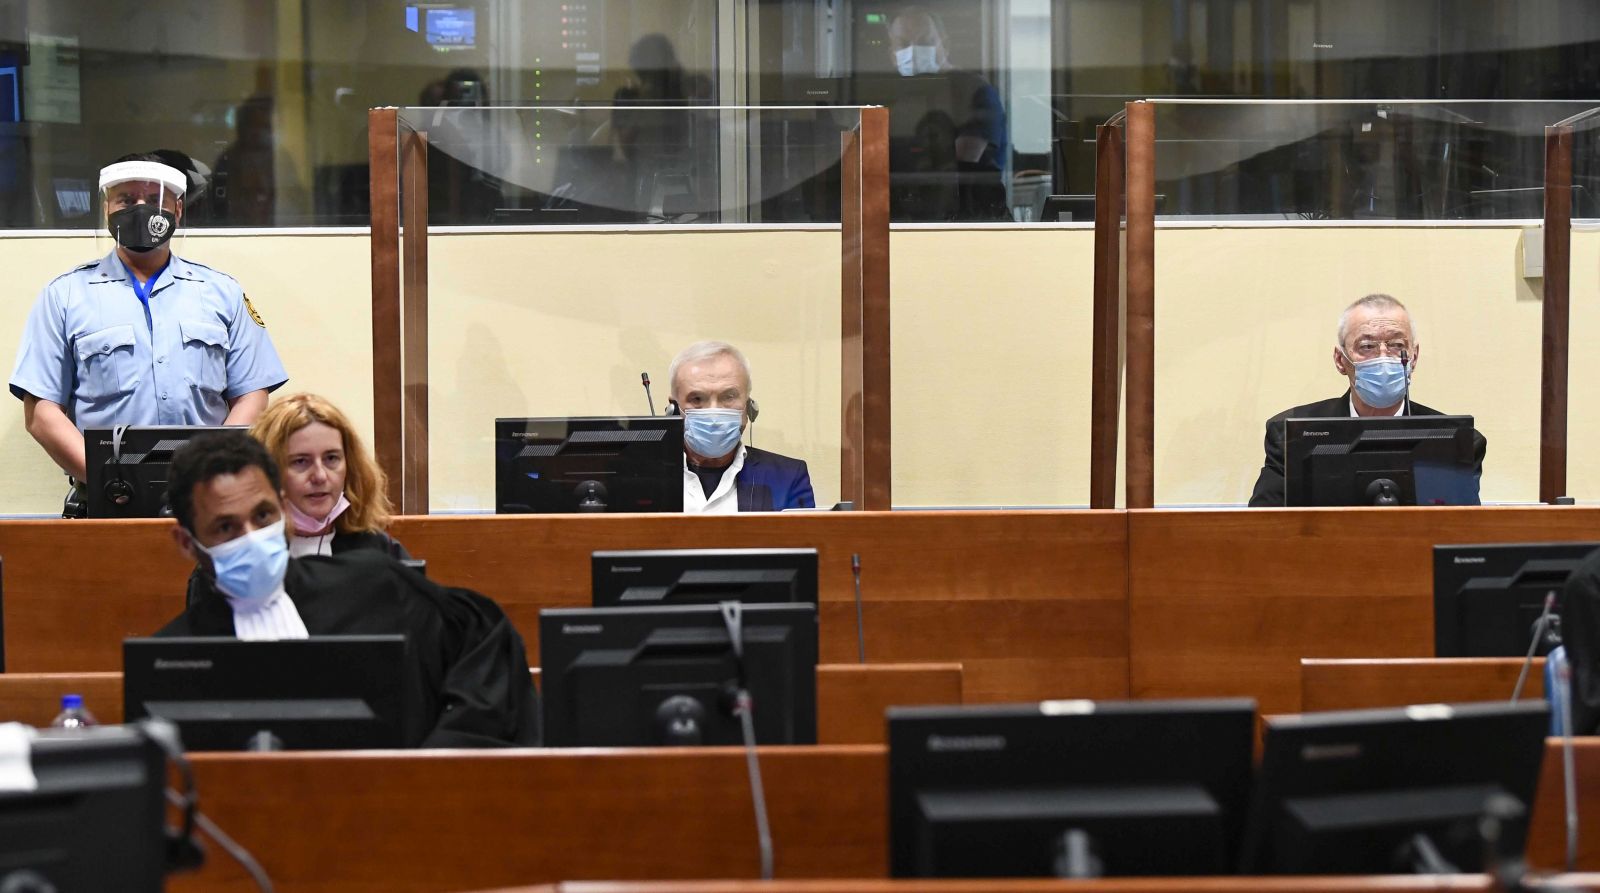 epa09313536 Jovica Stanisic, 70, the former head of Serbia's state security service, and his deputy, Franko Simatovic, 71 appear in court at the UN International Residual Mechanism for Criminal Tribunals (IRMCT) in The Hague, Netherlands, 30 June, 2021. The two ex-security chiefs of the Serbian state security service are to be given a verdict on 30 June 30 on charges of running death squads in the 1990s Balkan wars.  EPA/Piroschka van de Wouw / POOL